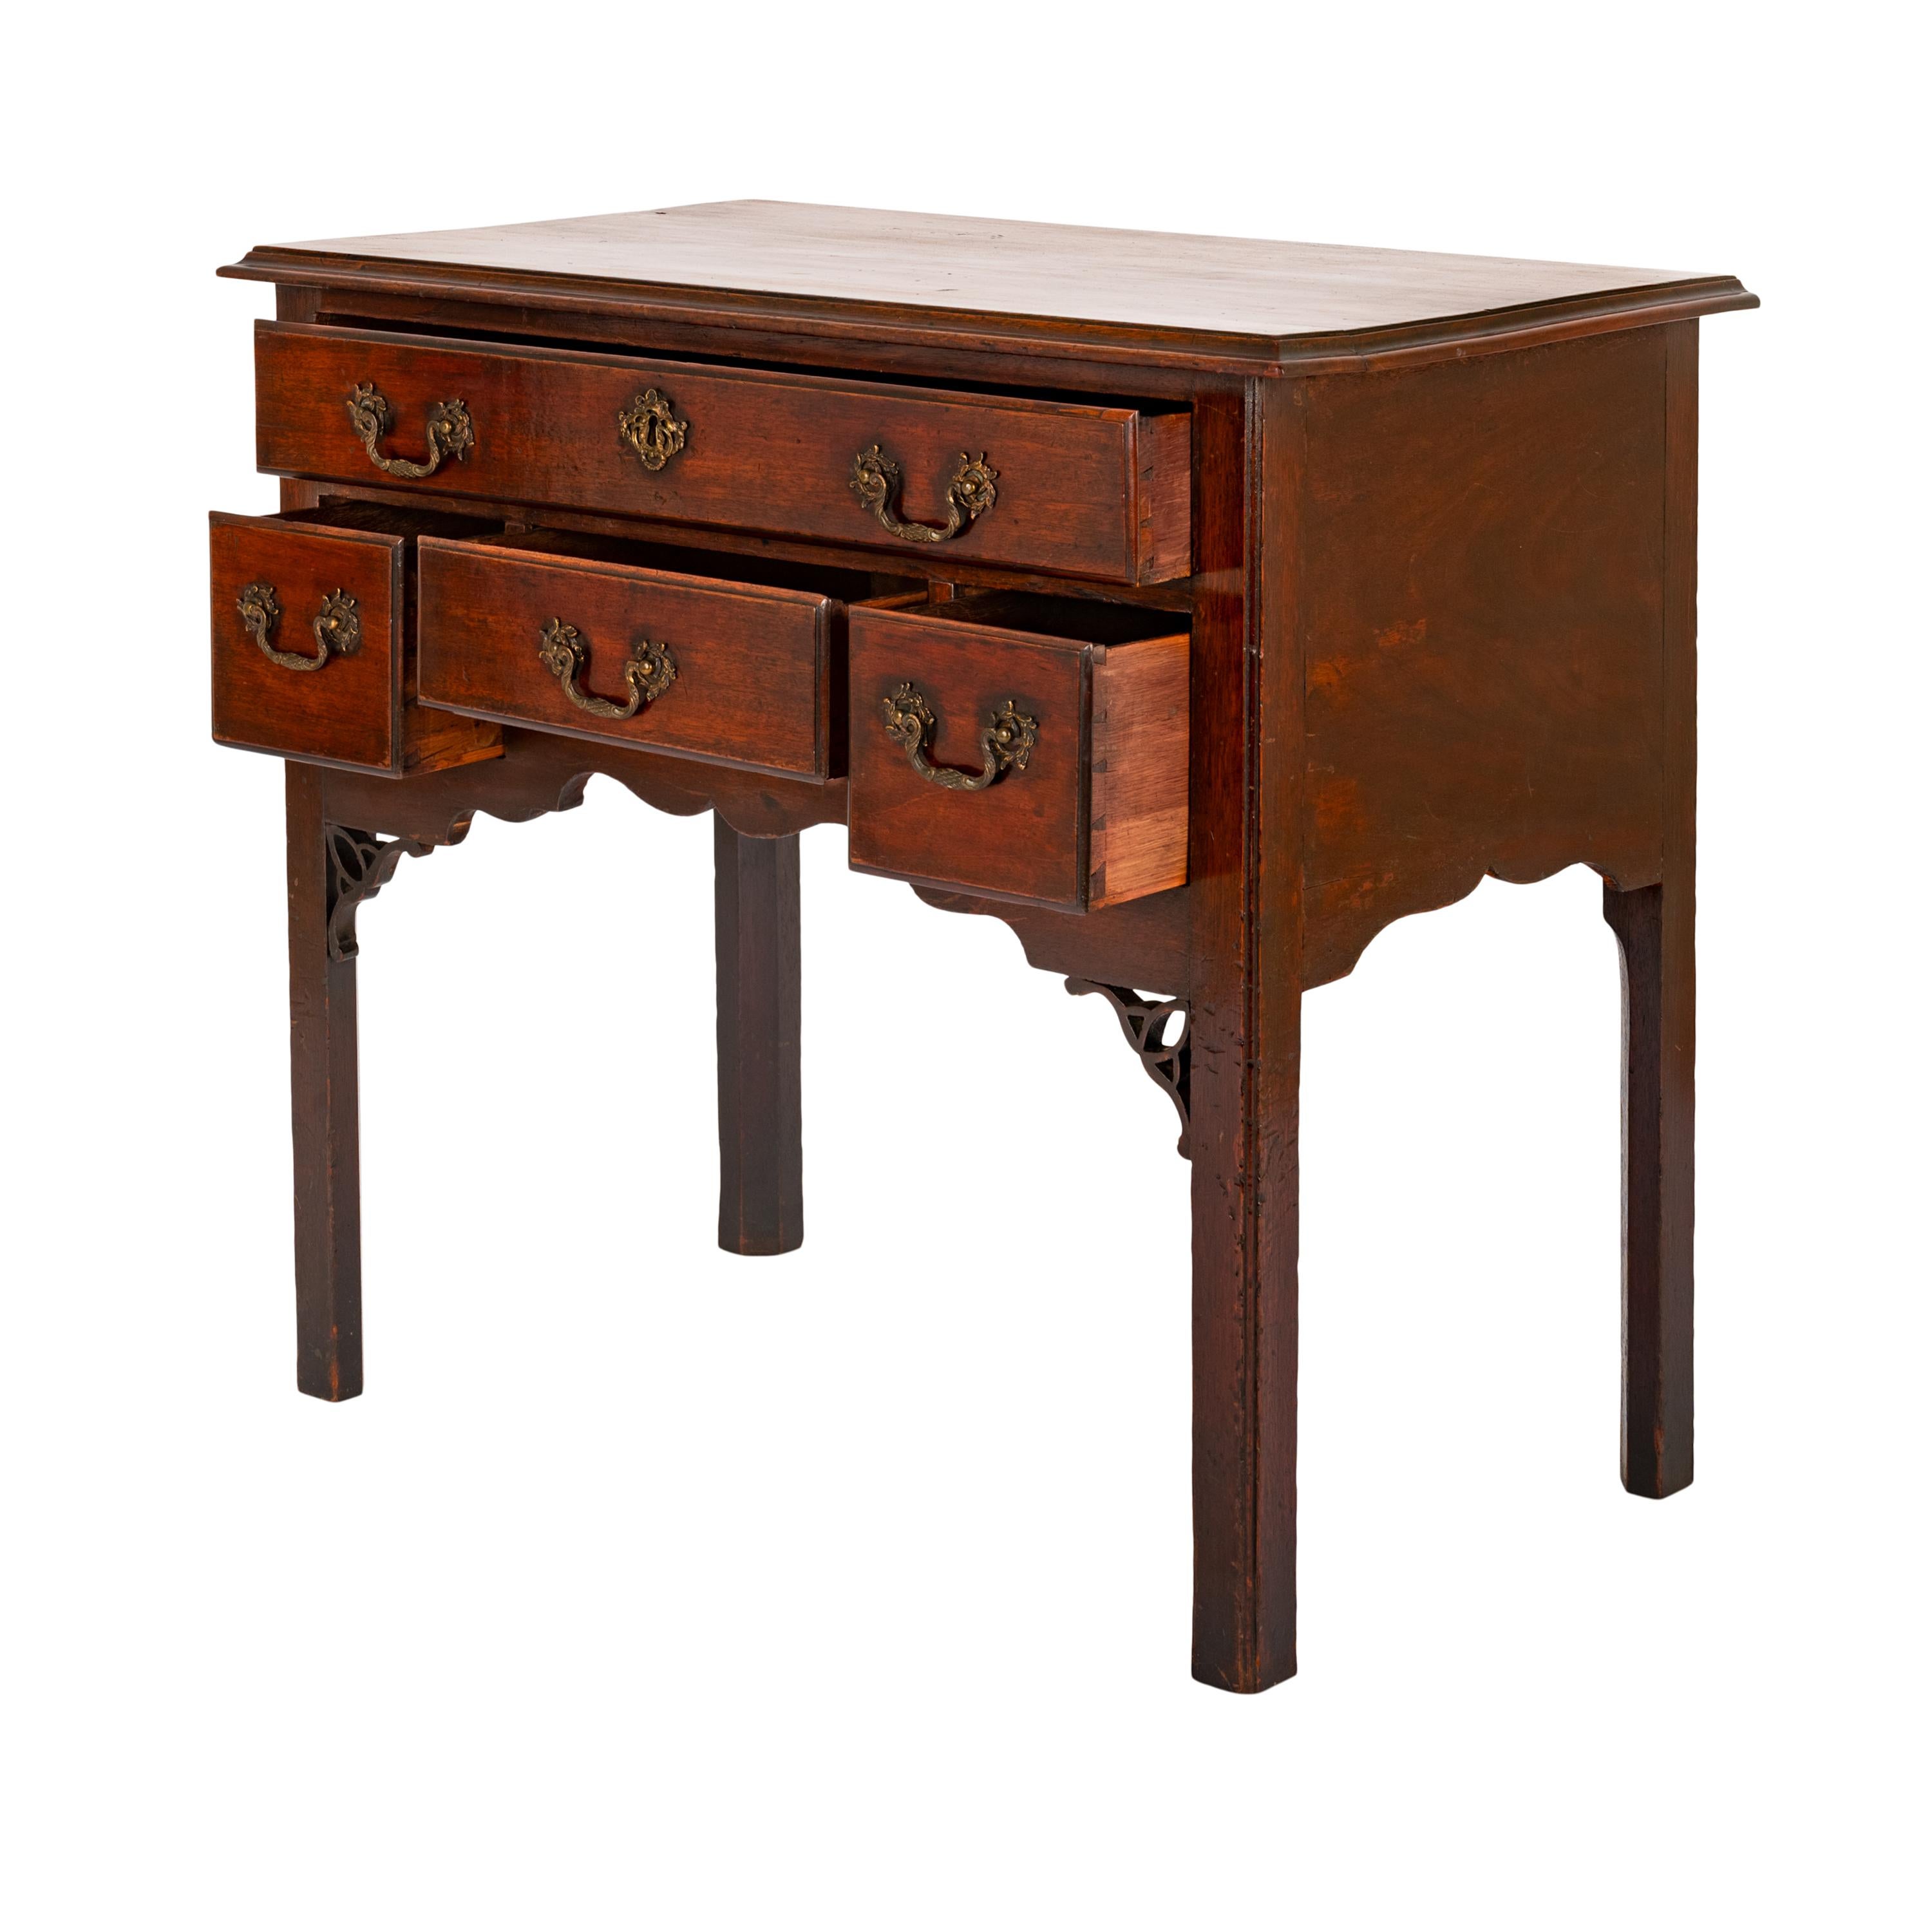 Antique English 18th C Georgian Mahogany Chippendale Lowboy Side Table 1750 For Sale 1